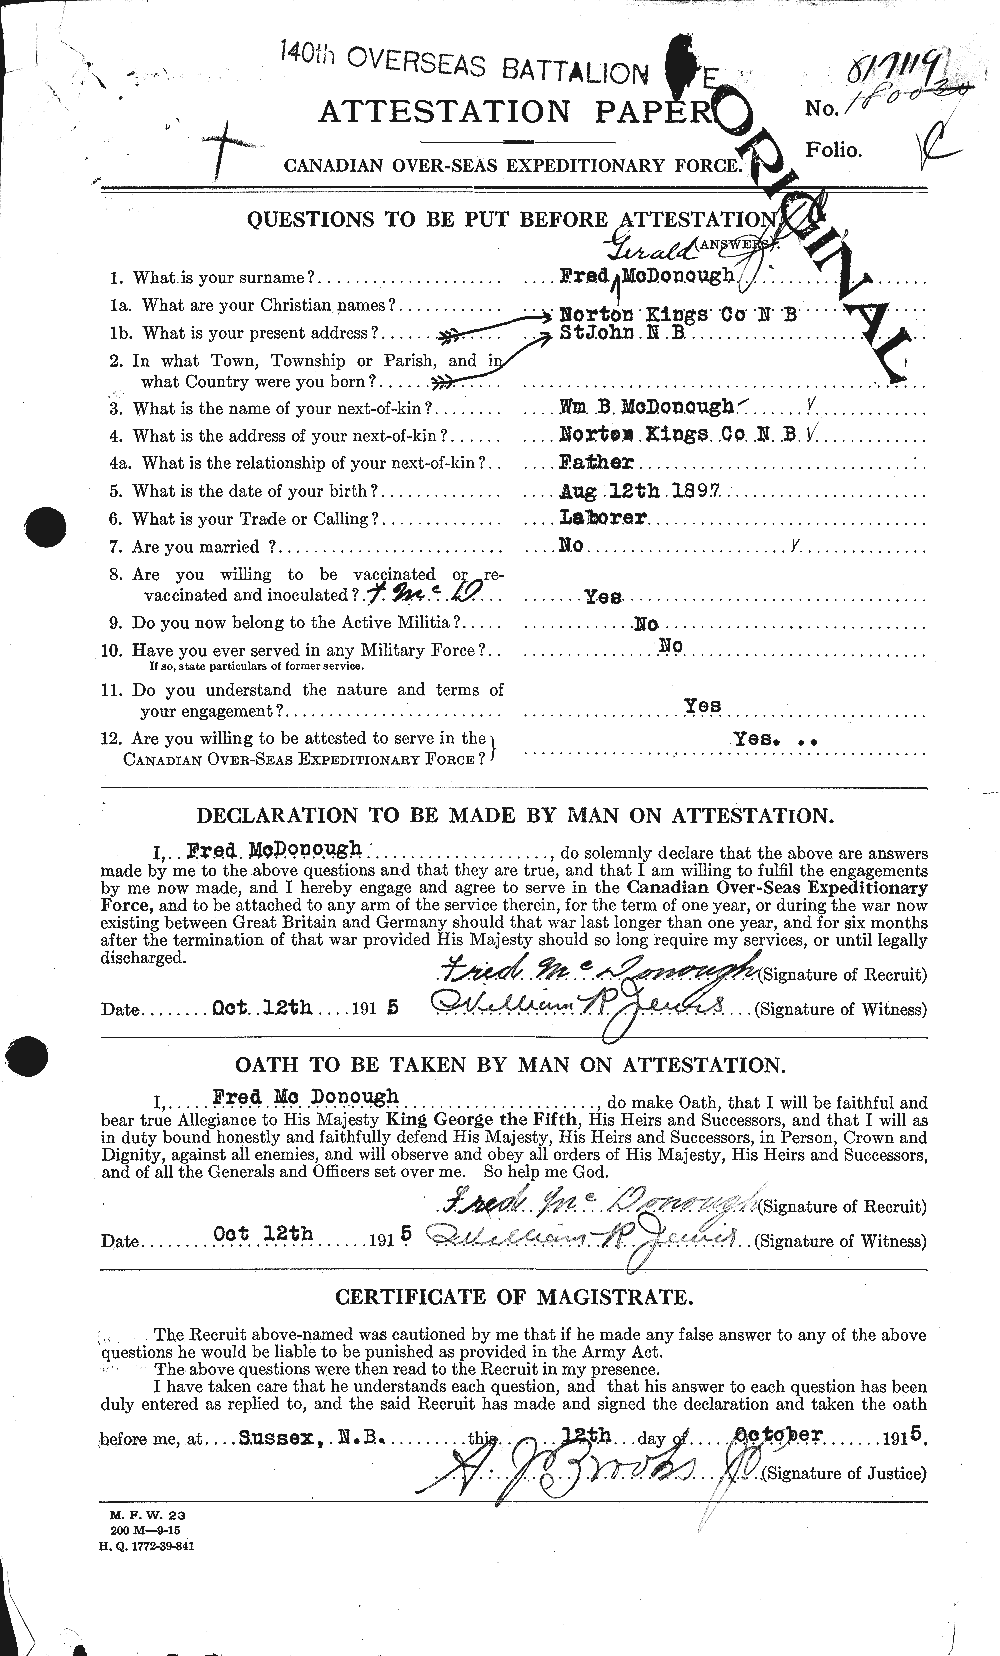 Personnel Records of the First World War - CEF 525109a